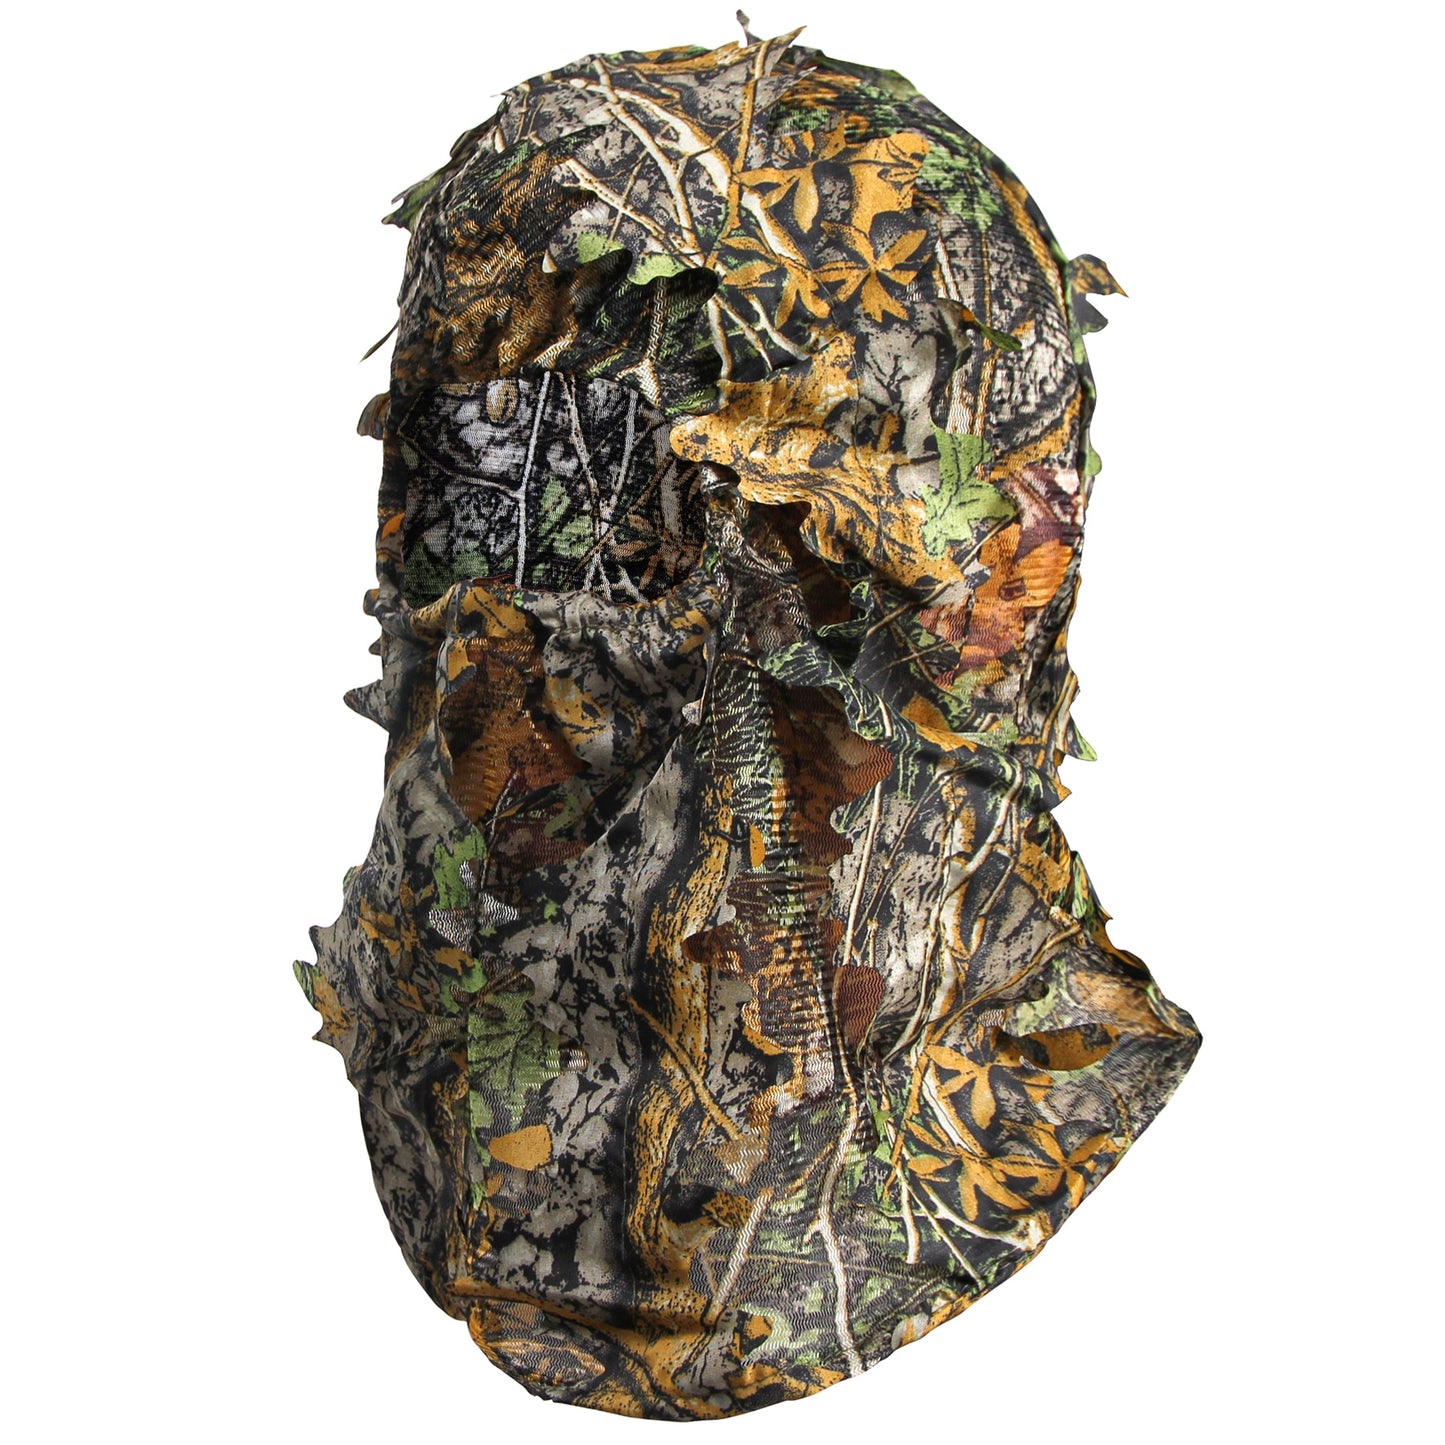 GUGULUZA 3D Camouflage Mask Ghillie Camo Head Hood Breathable Hat Woodland Sunproof Birdwatching Airsoft Hunting Accessories